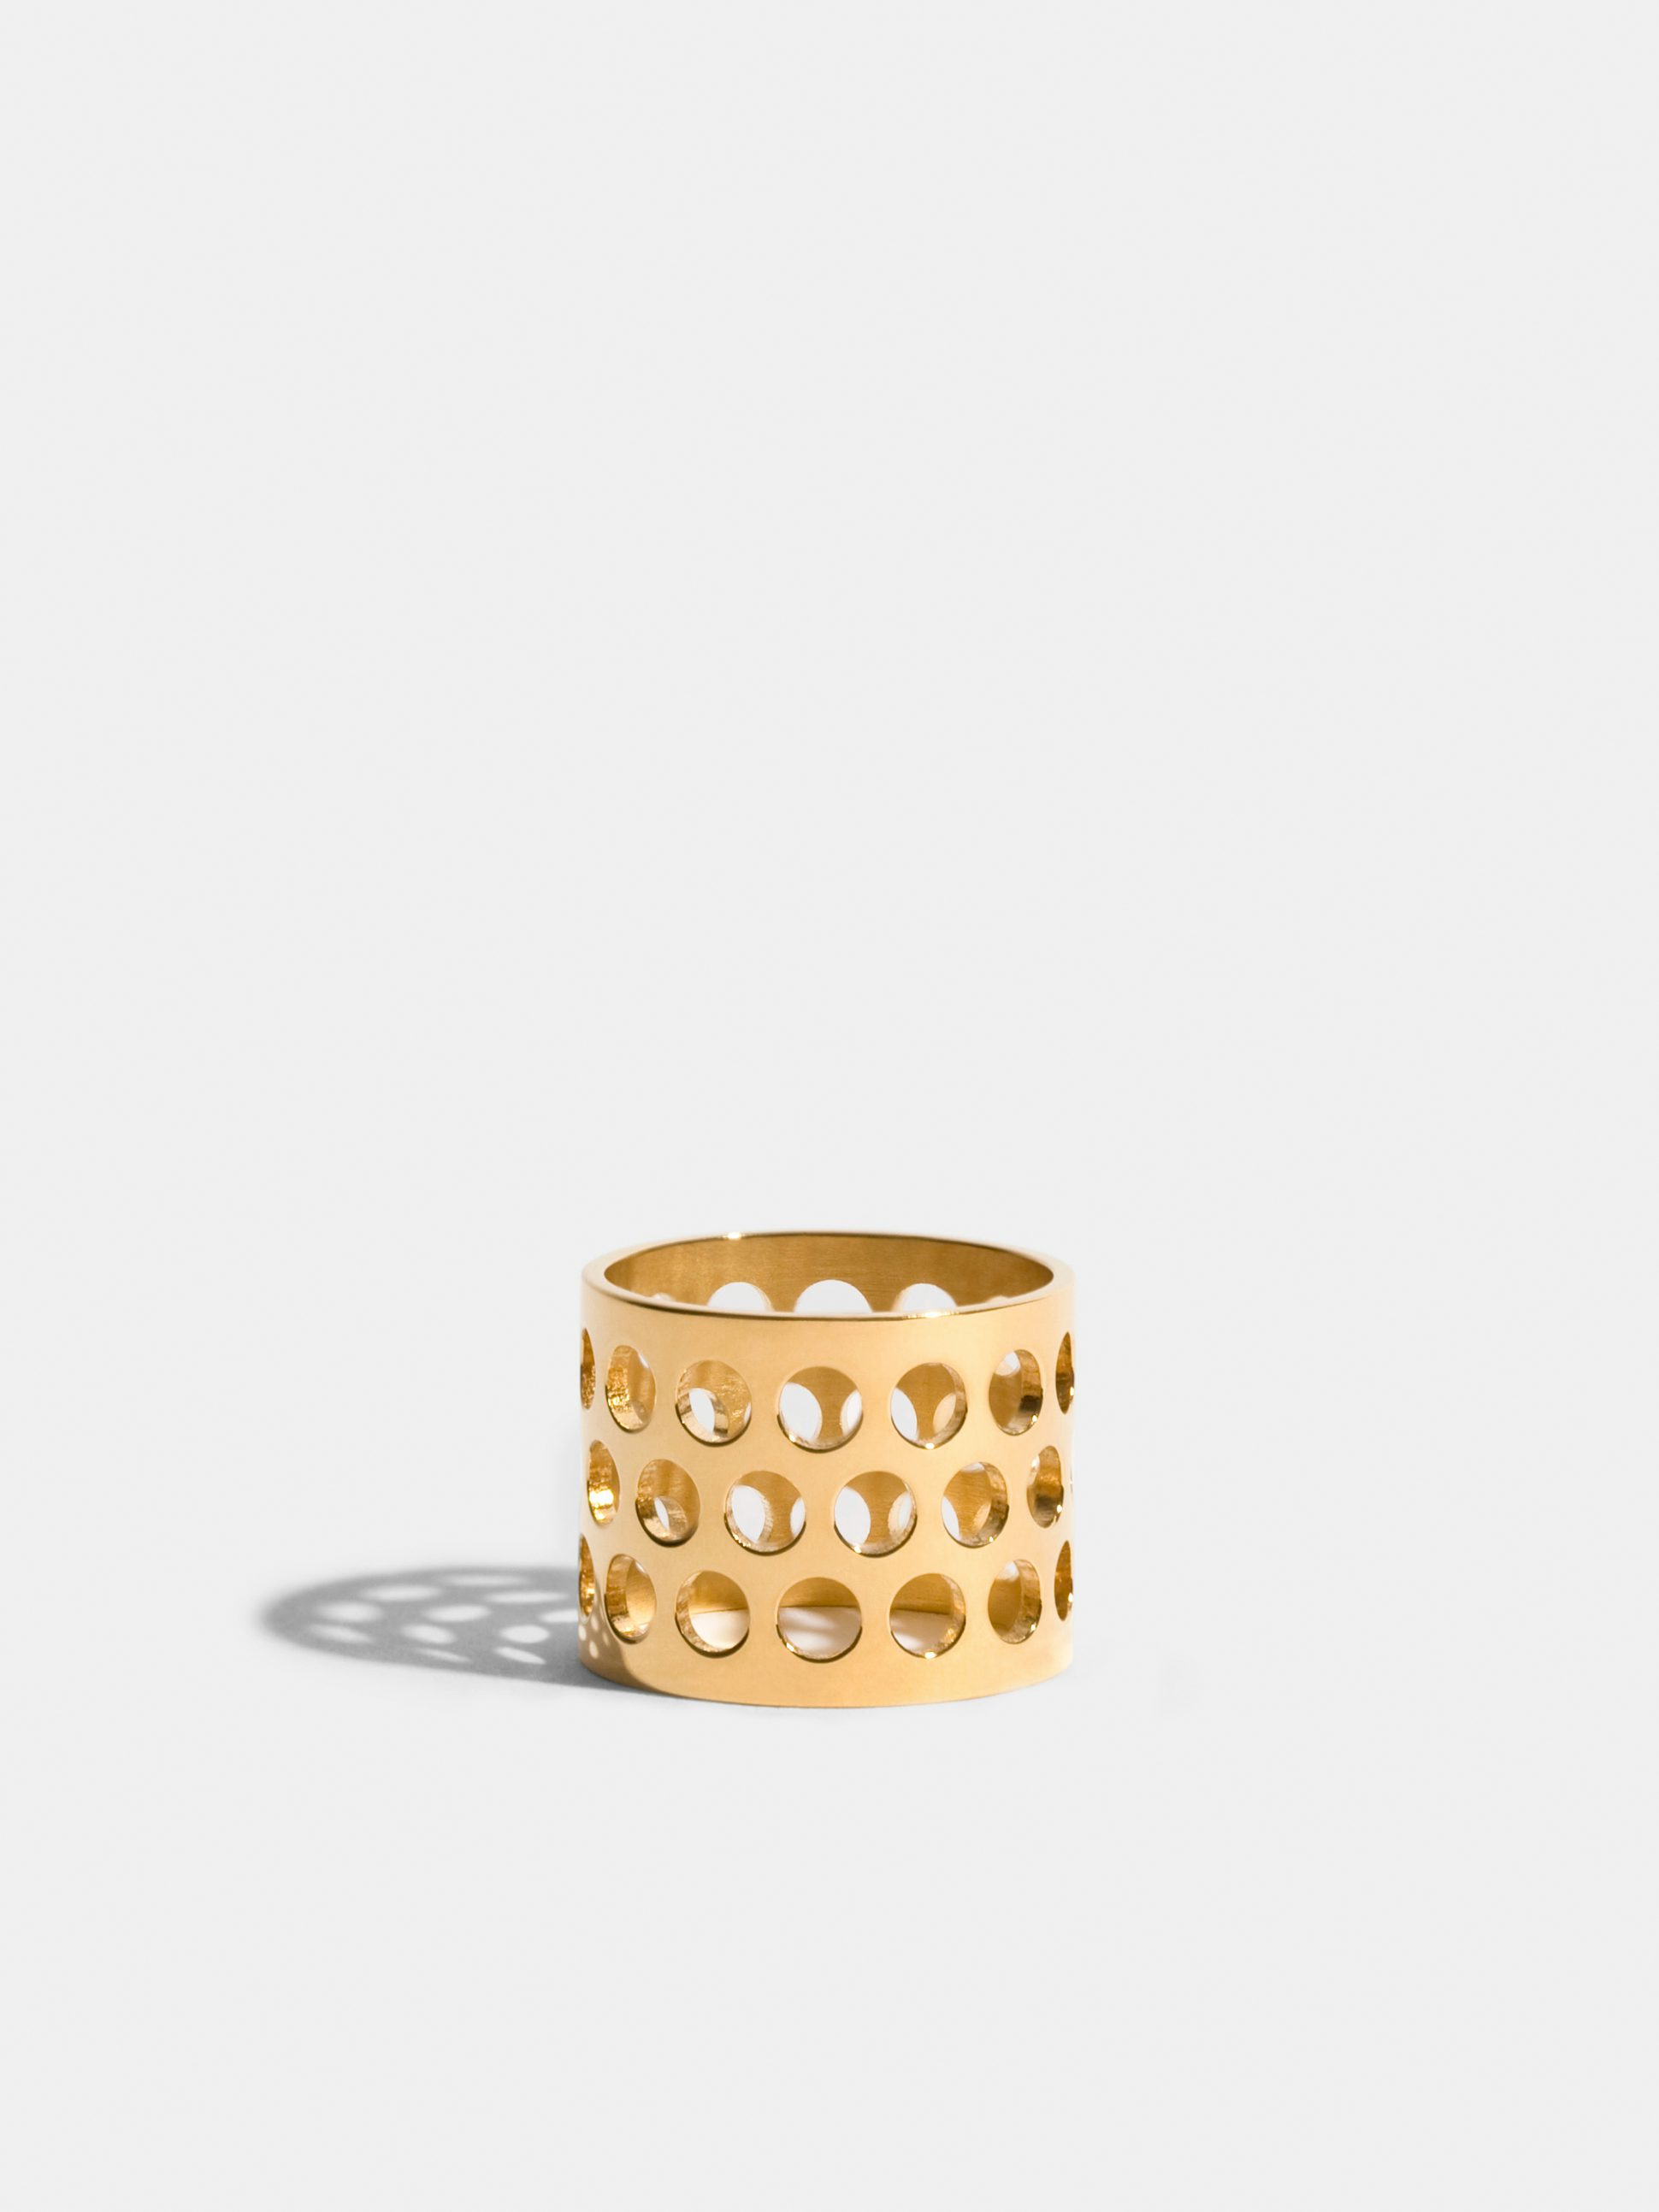 Voids, JEM by India Mahdavi, ring VI in 18k Fairmined ethical yellow gold (3 rows, large perforations)